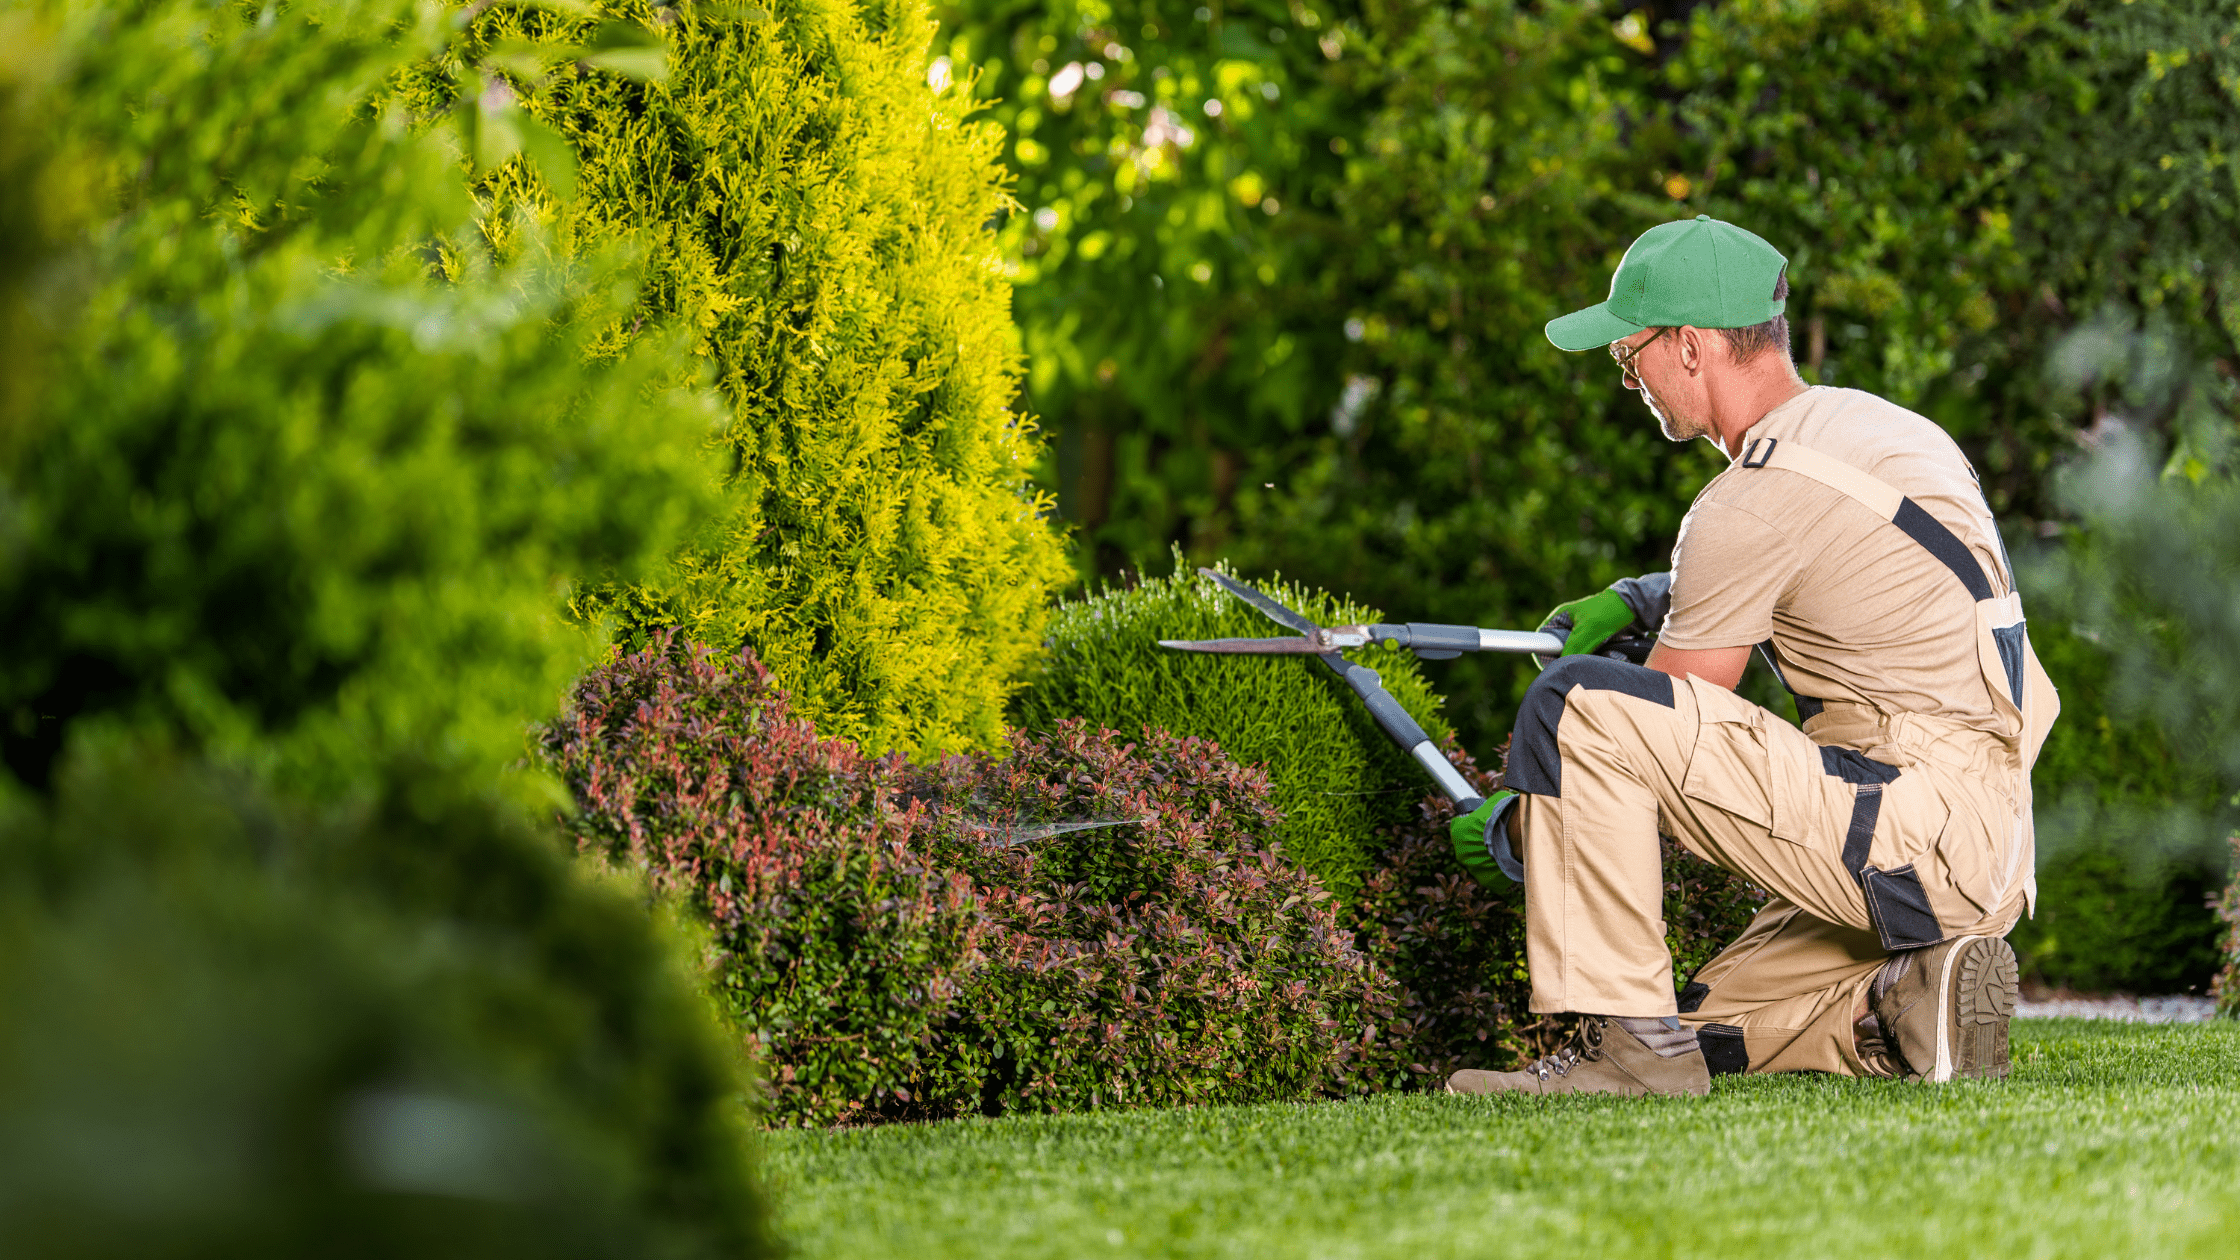 Reduce workload in your HOA maintenance